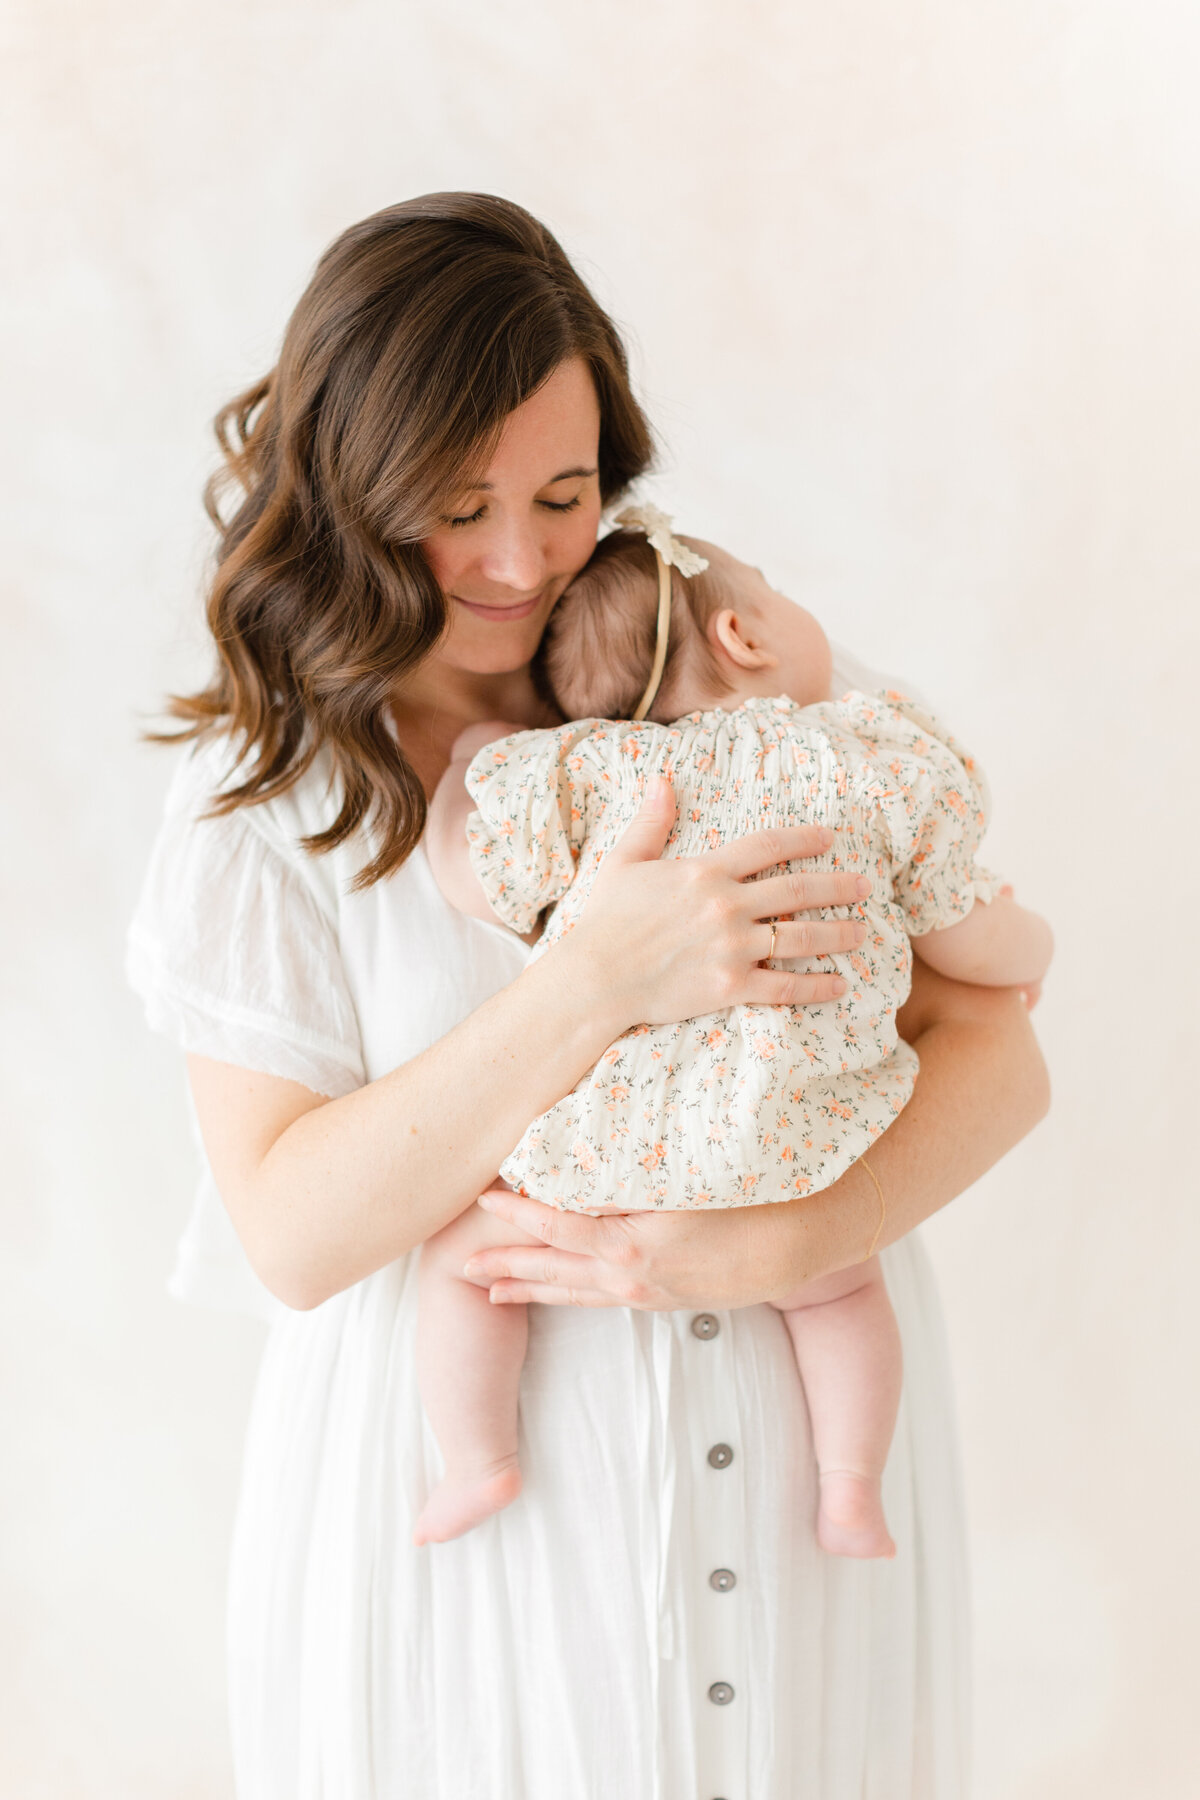 A Baby Photography photo in Northern Virginia of a mother holding her 6 month old baby girl in front of a hand-painted canvas backdrop